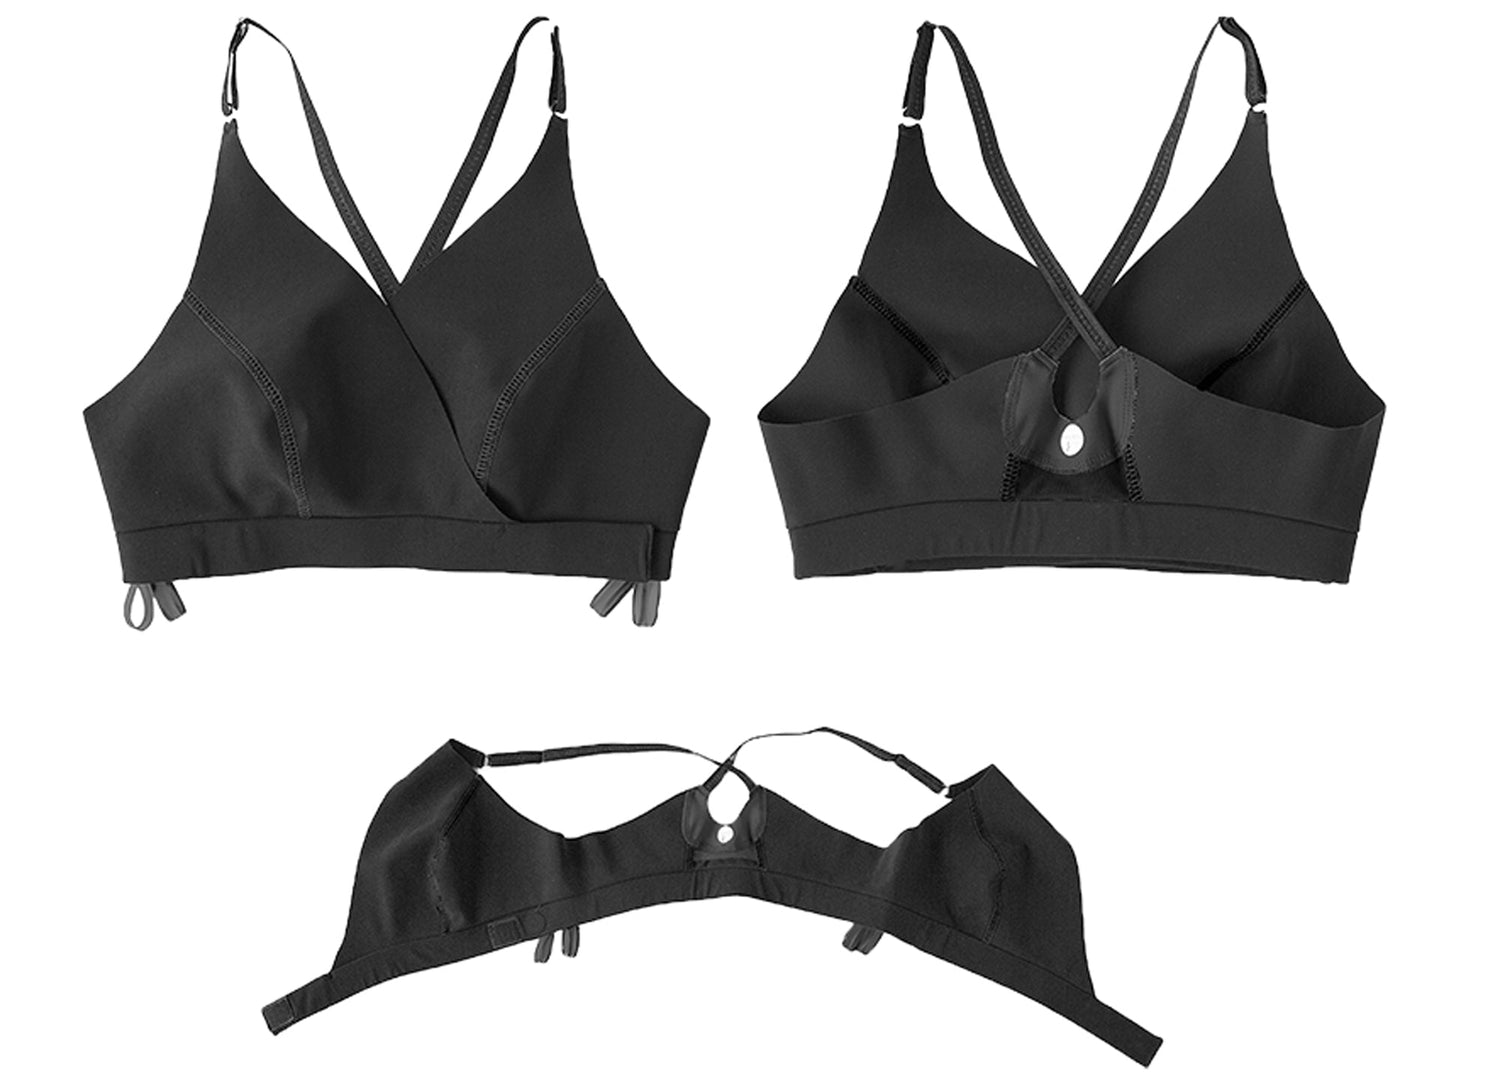 Magnetic Attraction Front Closure Push-up Bra For Women